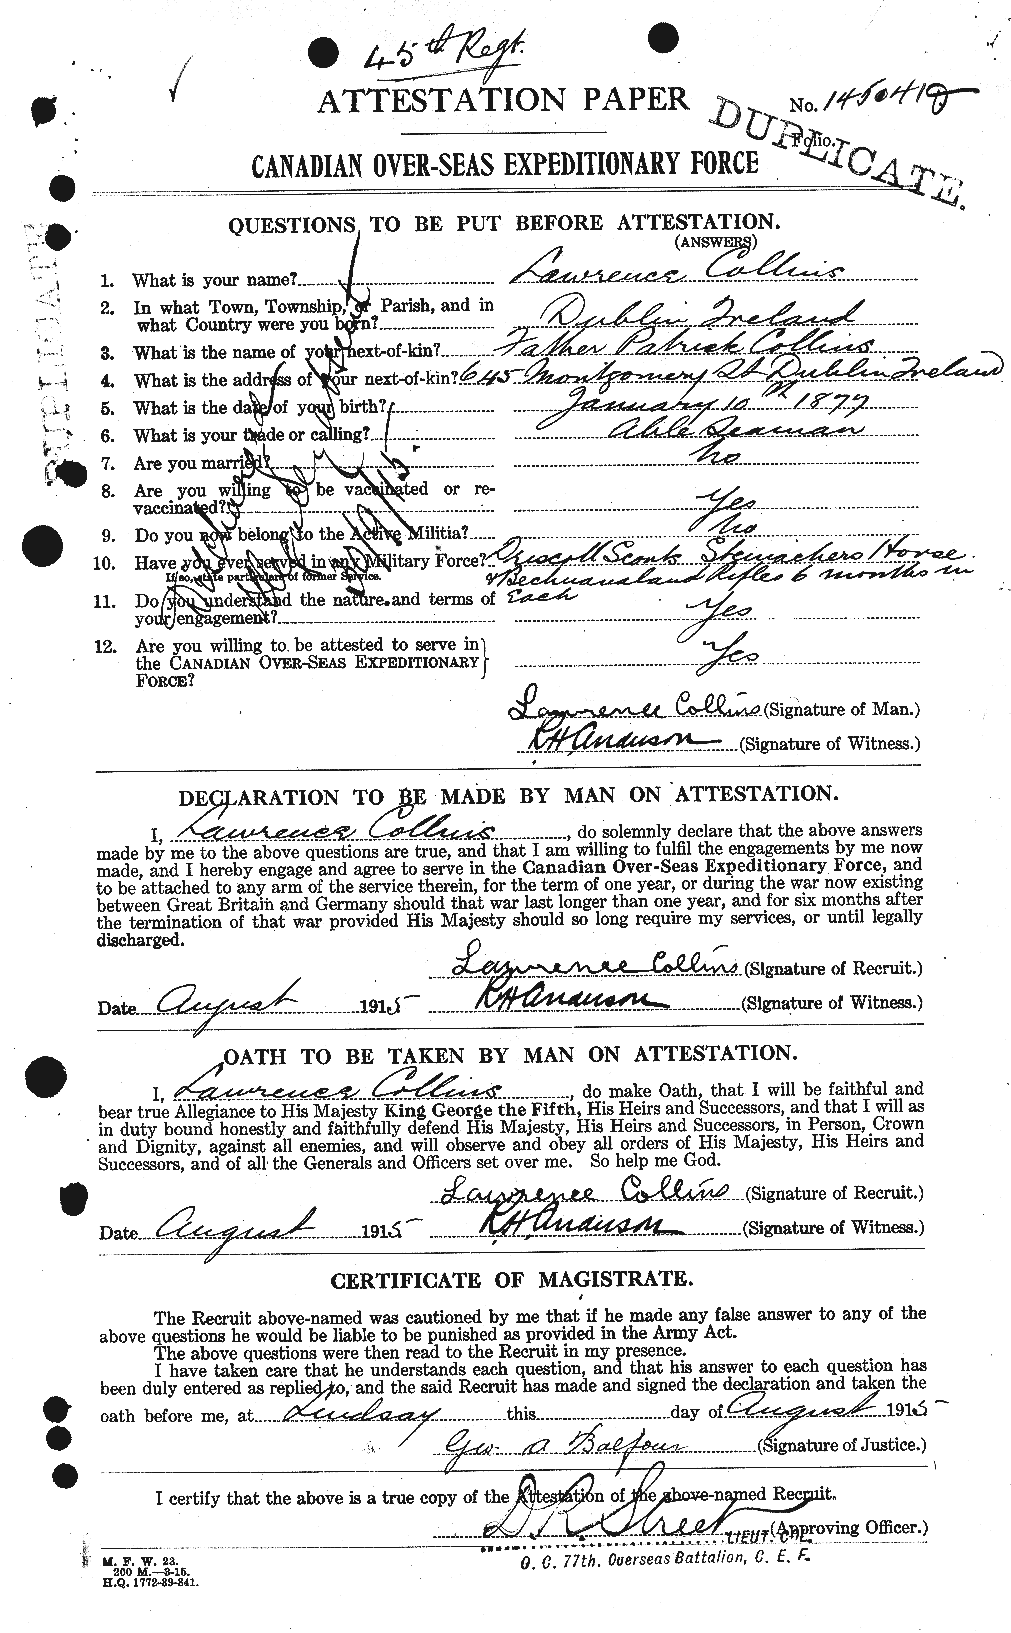 Personnel Records of the First World War - CEF 069502a